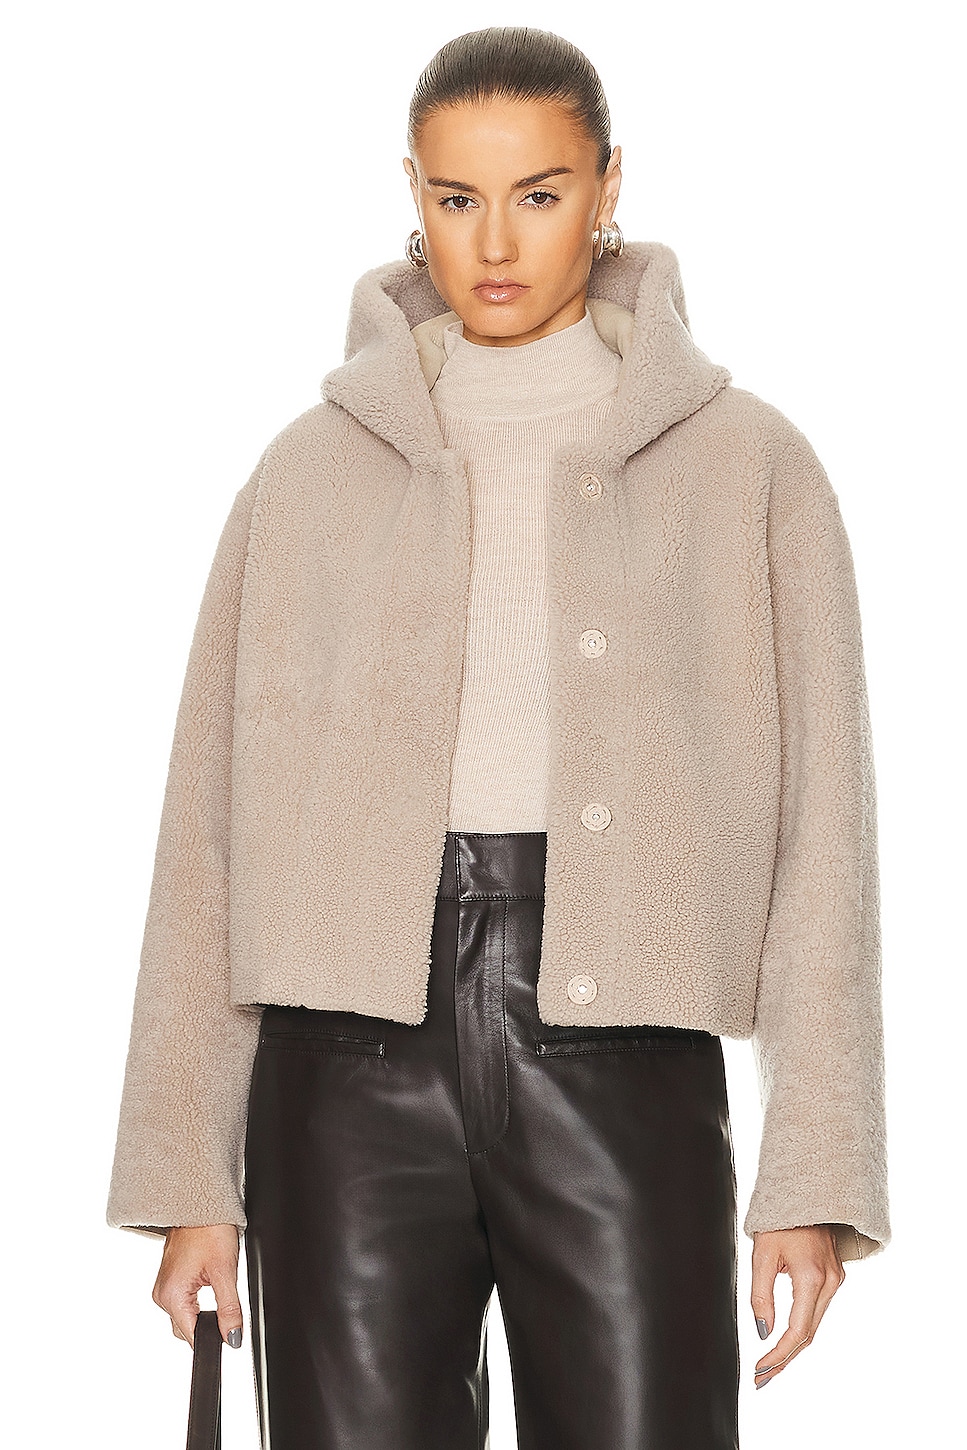 Image 1 of NOUR HAMMOUR Cooper Cropped Light Shearling Jacket in Vanilla